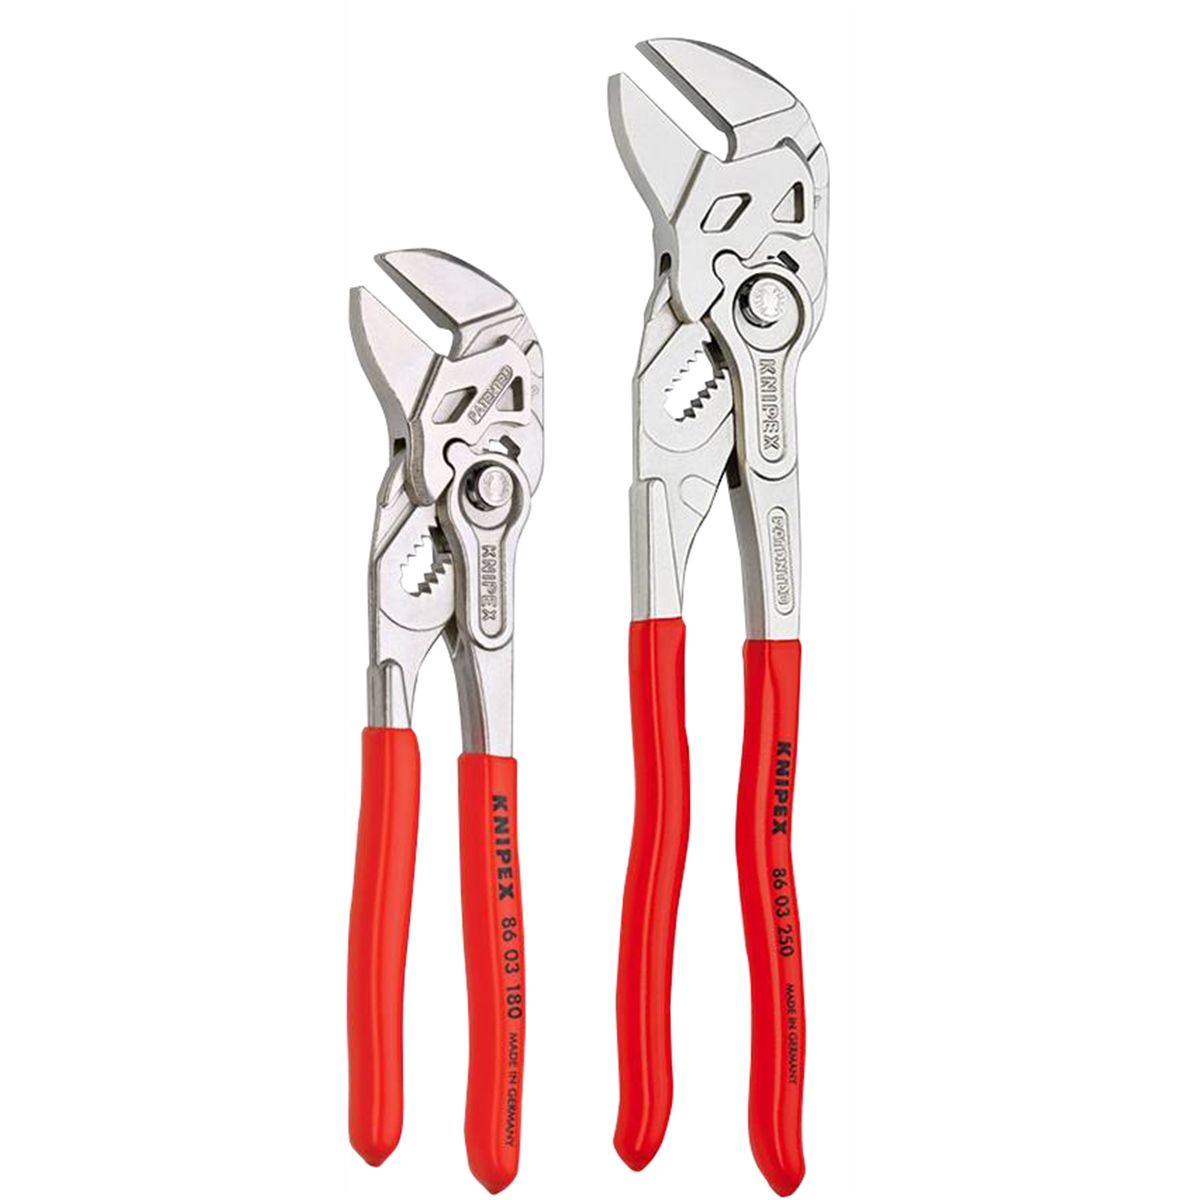 2 Piece Pliers Wrench Set